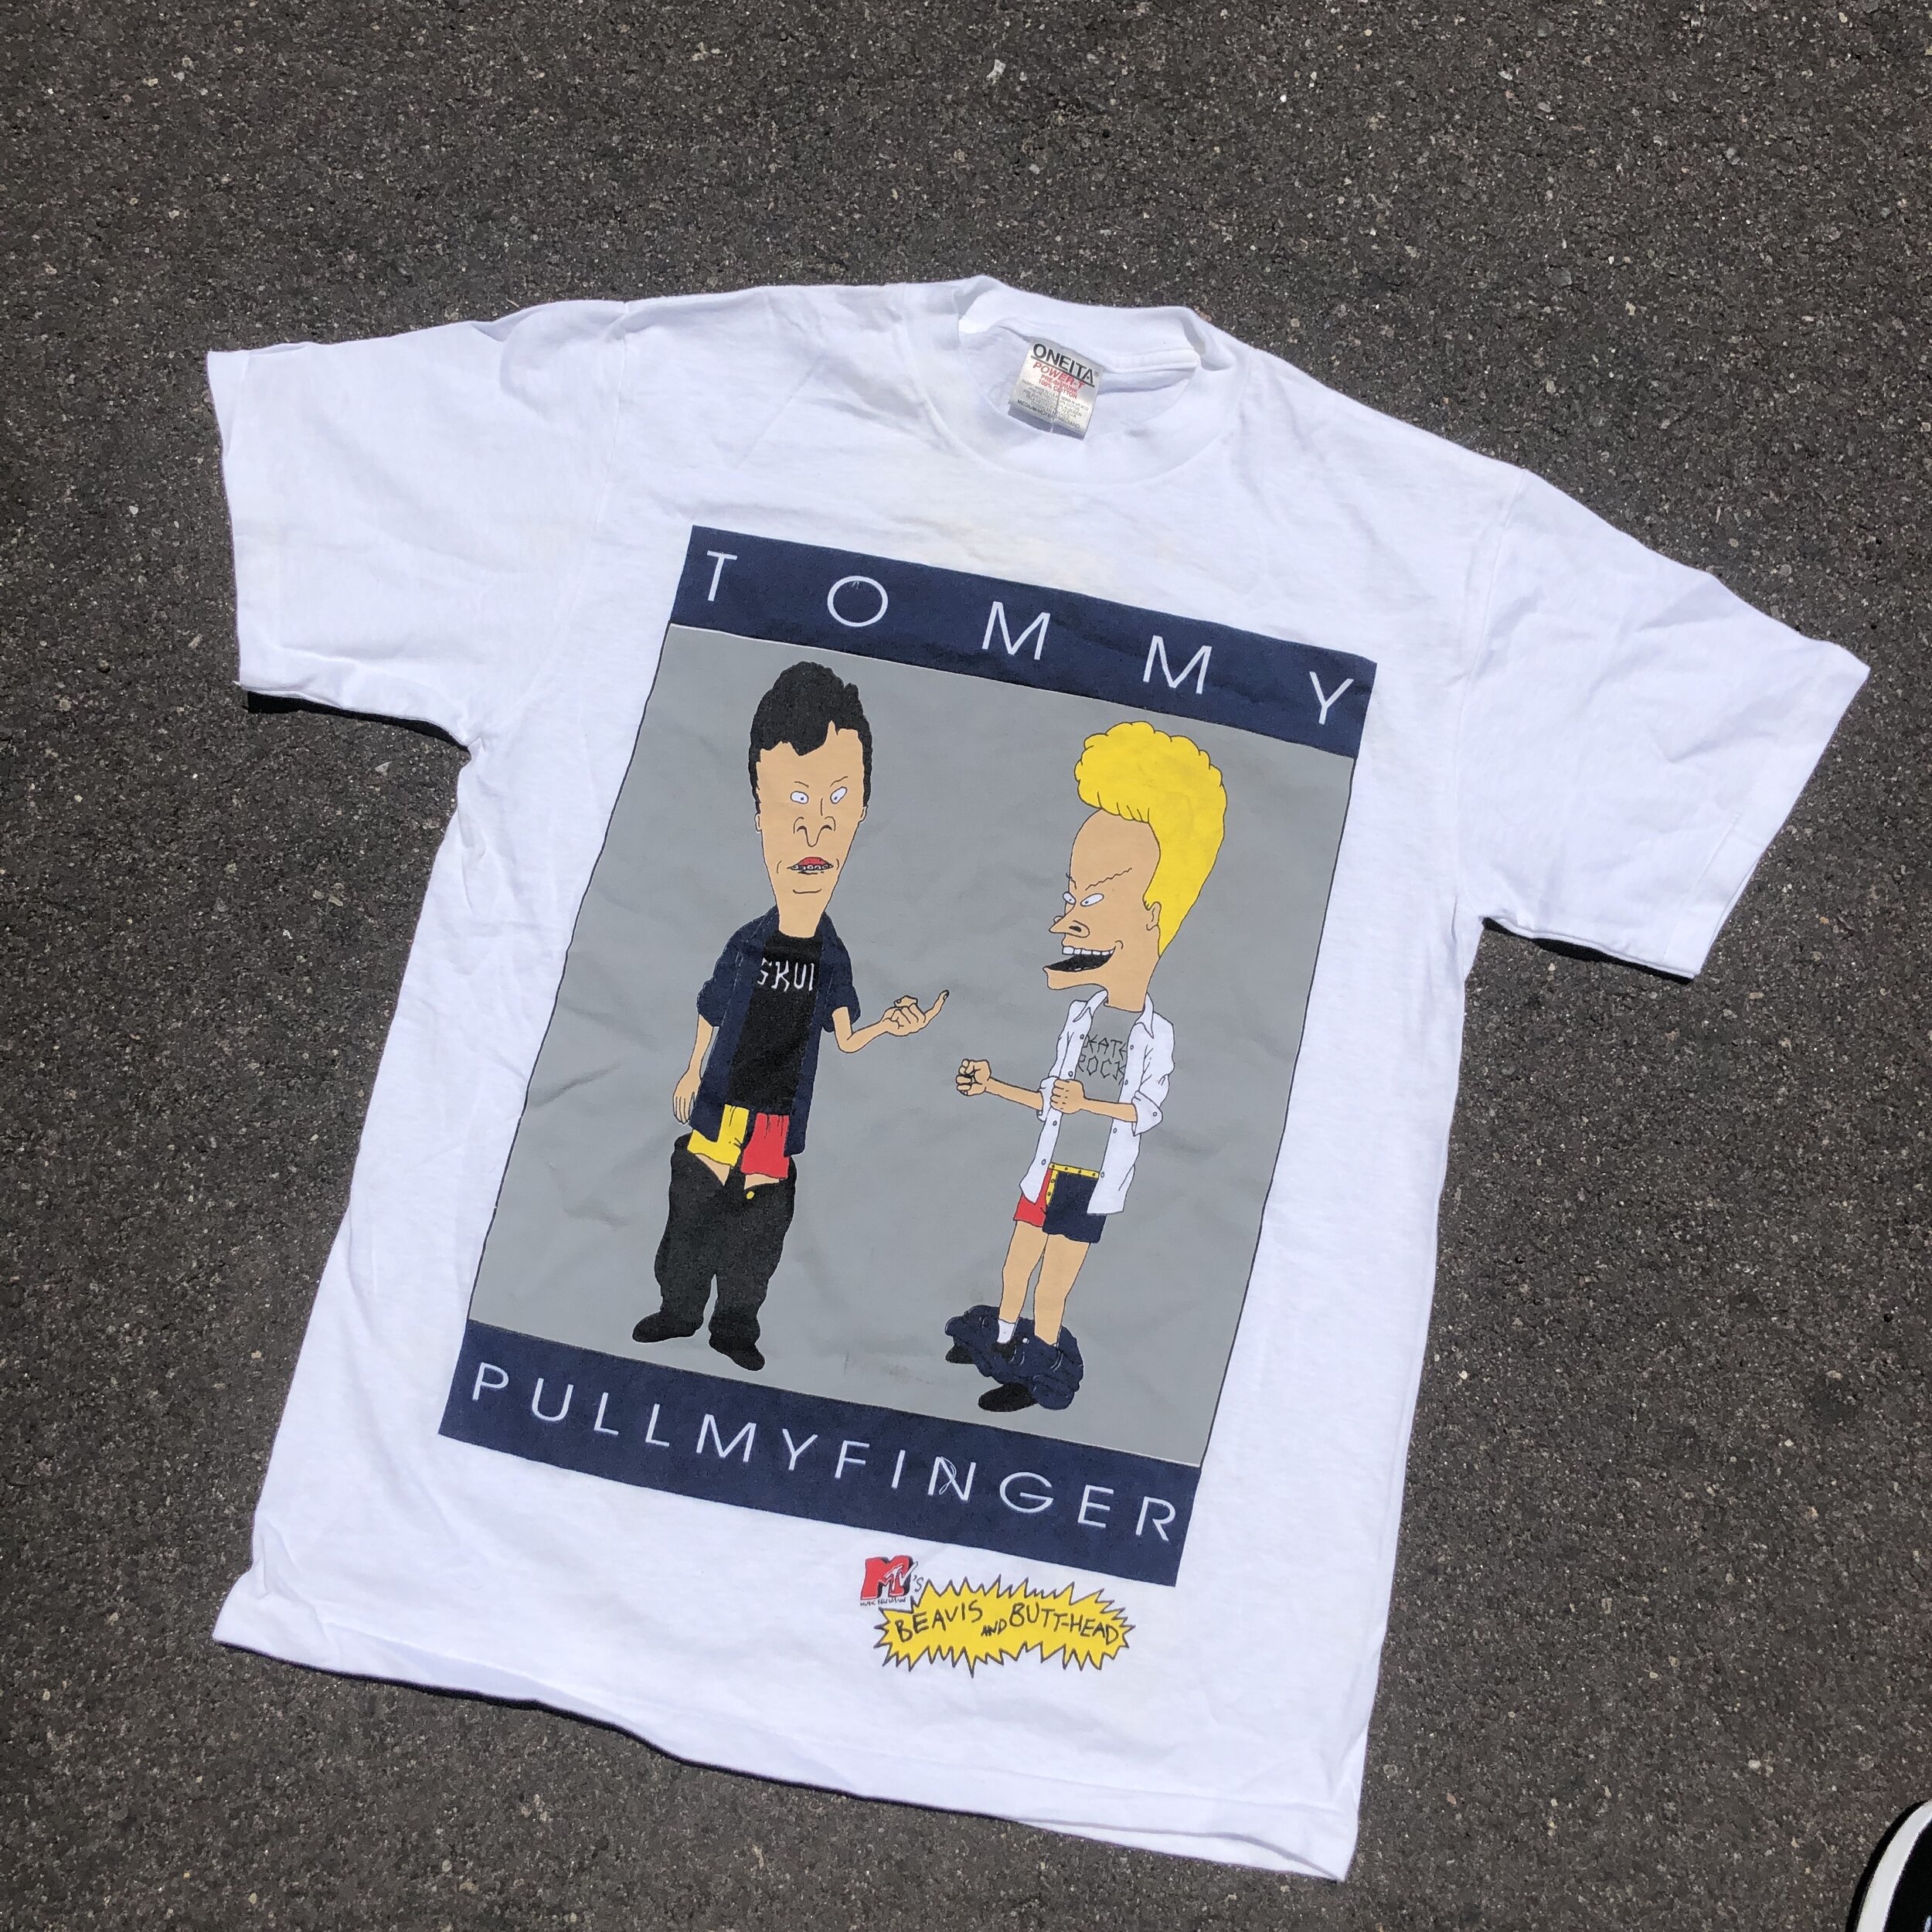 tommy pull my finger t shirt